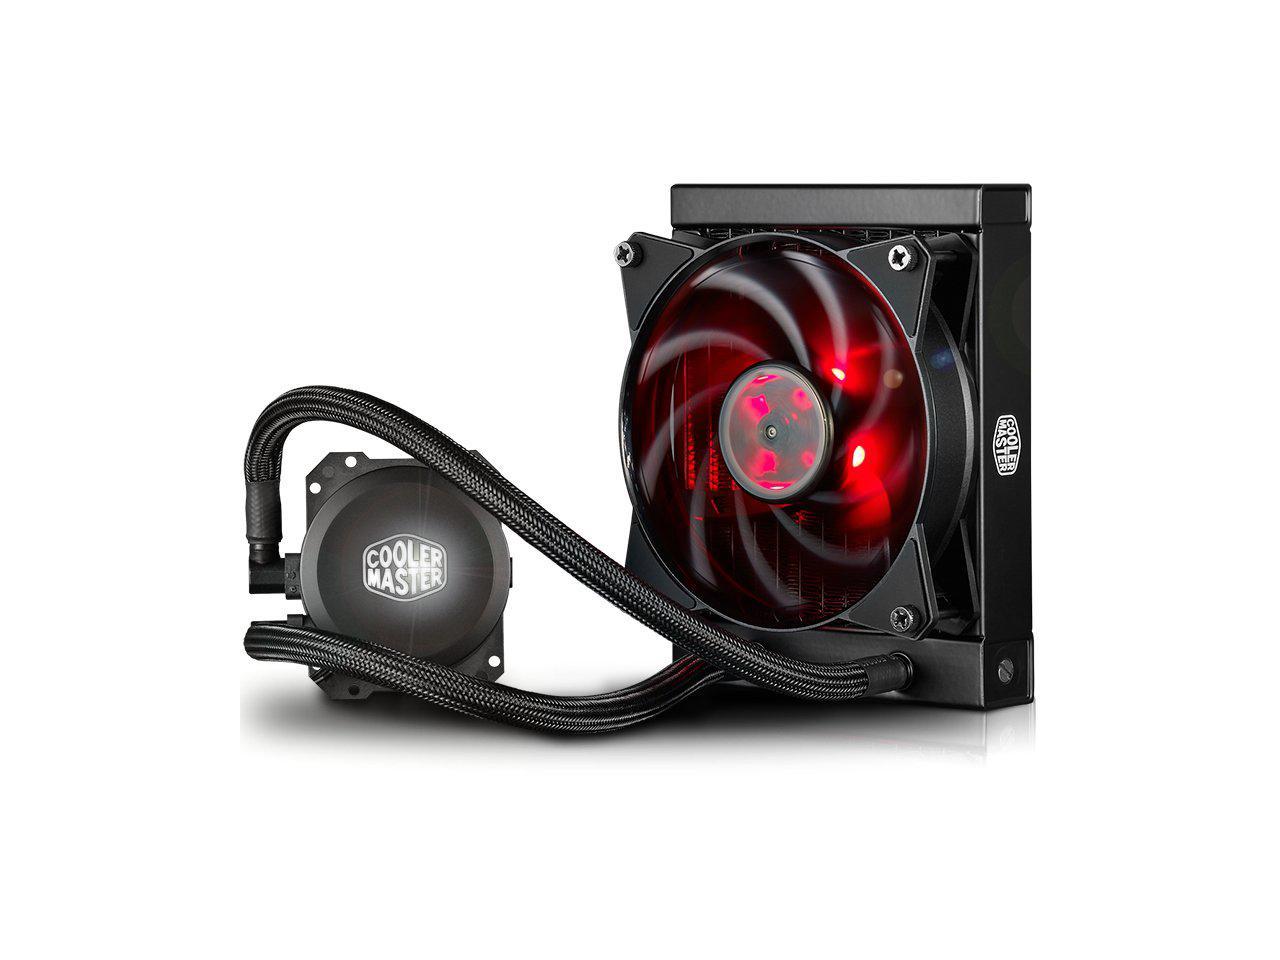 Cooler Master Masterliquid Lite 120 All In One Aio Cpu Liquid Cooler With Fire Red Led Masterfan 120mm Radiator Dual Chamber Pump Intel Amd Universal Mounting Lga 2066 Amd Am4 Compatible Newegg Com